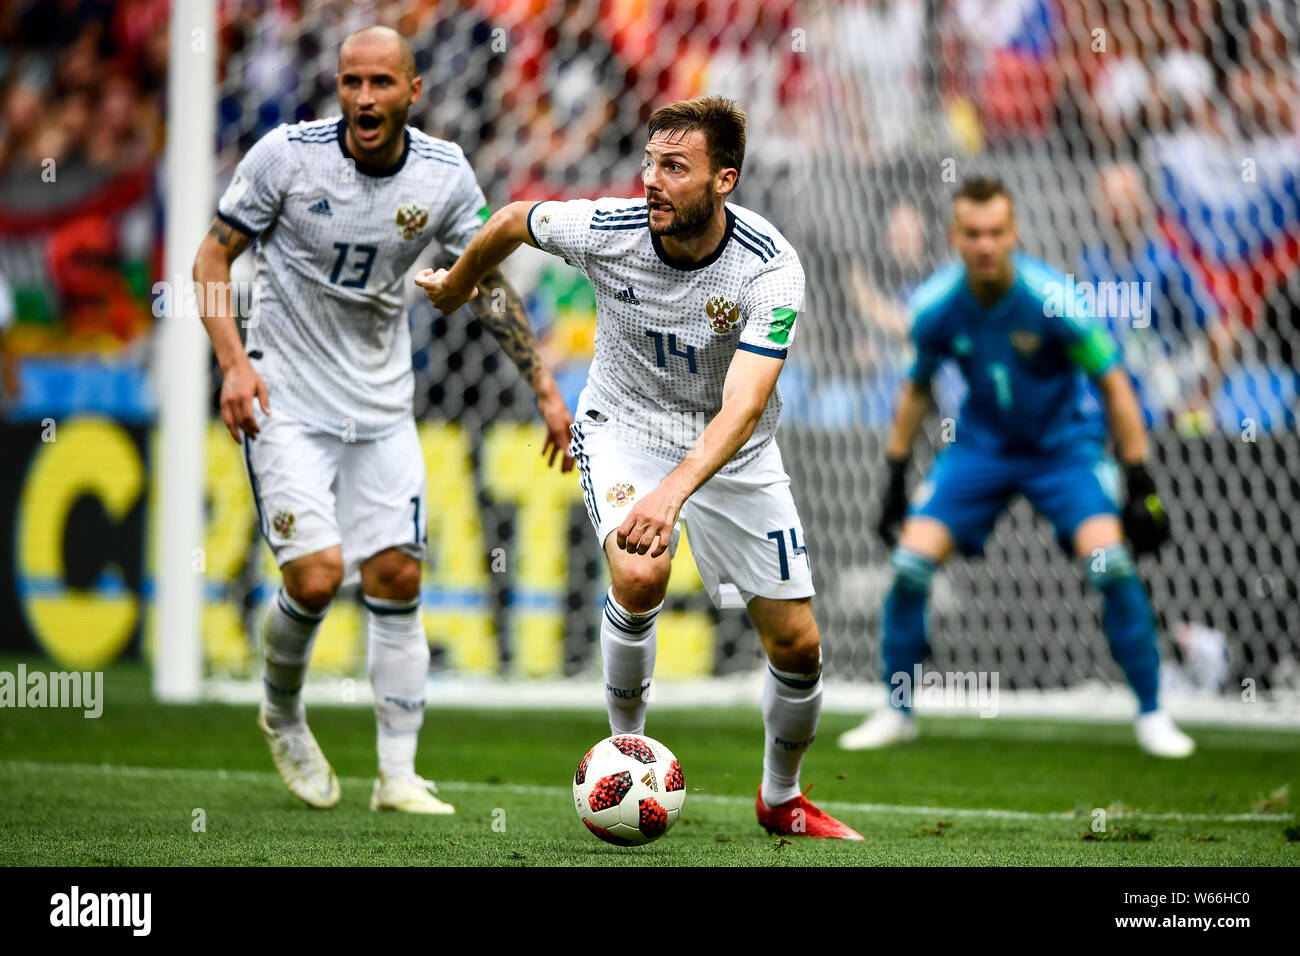 Vladimir Granat of Russia, right, competes against Spain in their Round of 16 match during the 2018 FIFA World Cup in Moscow, Russia, 1 July 2018.   R Stock Photo